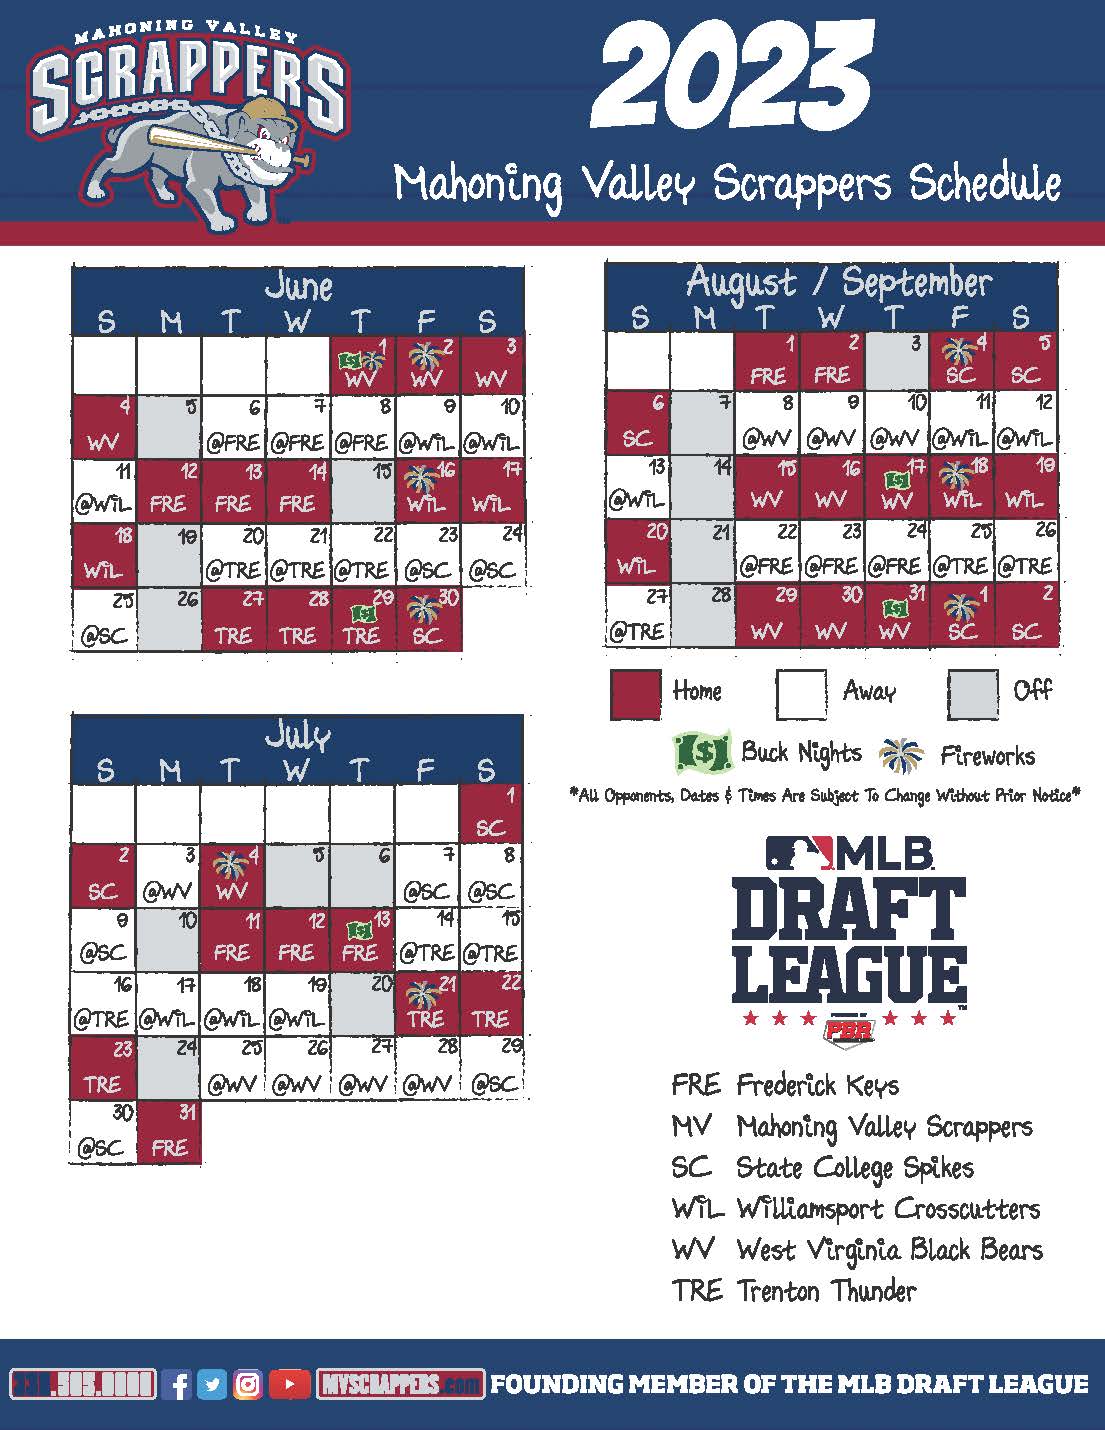 Scrappers & MLB Draft League Release 2023 Schedule - STN | Spanning the Need: Good News